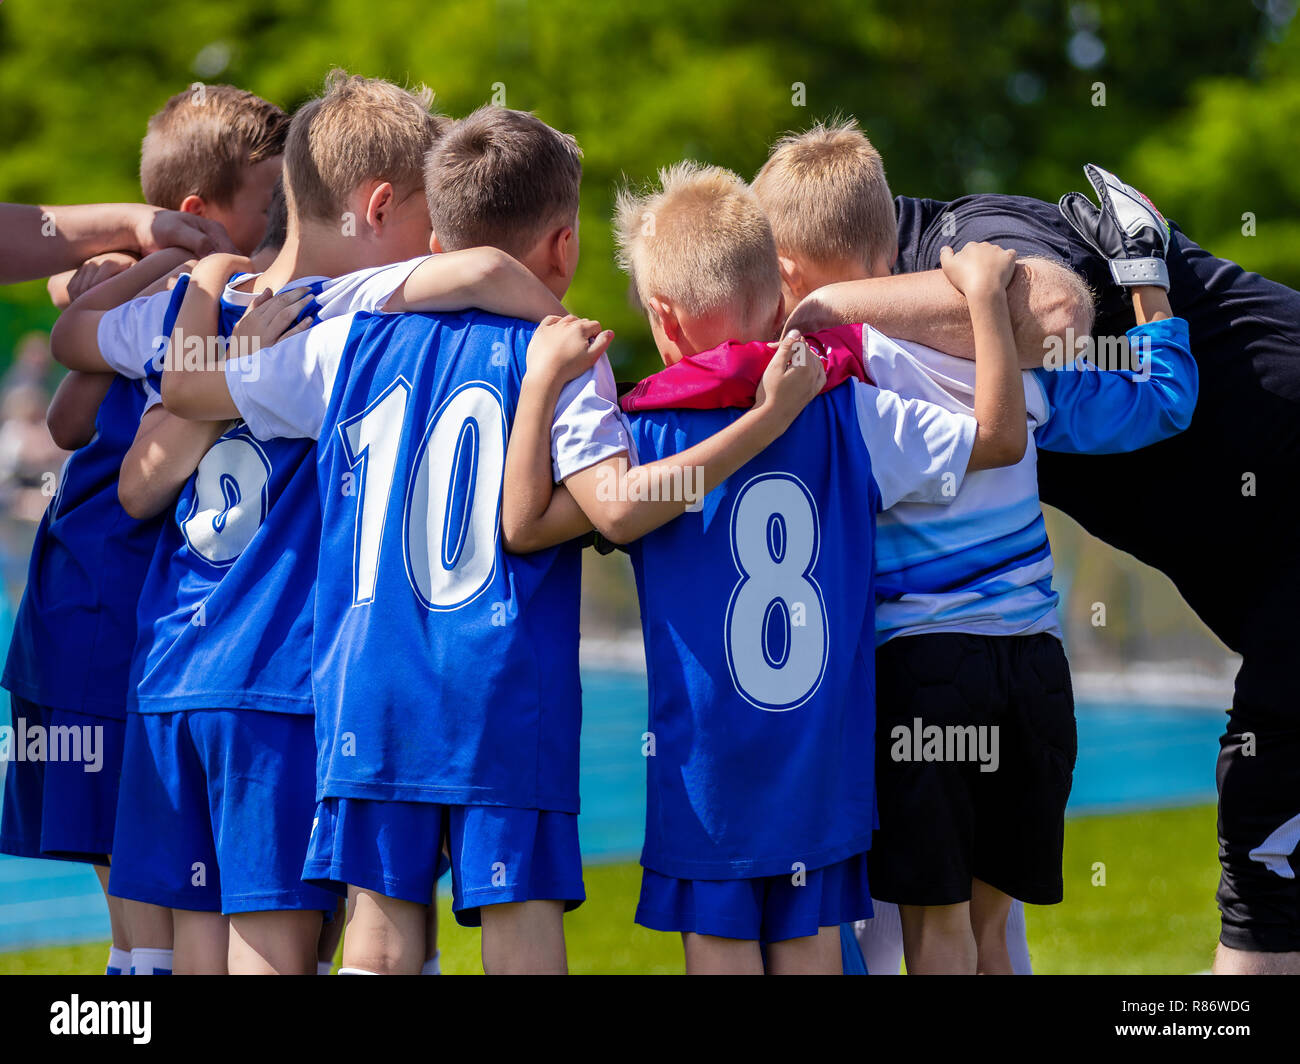 Kids Sports Team. Group of Soccer Team Players Standing Together With Coach. Coach Giving Young Sports Team Instructions. Sports Club For Kids. Coachi Stock Photo